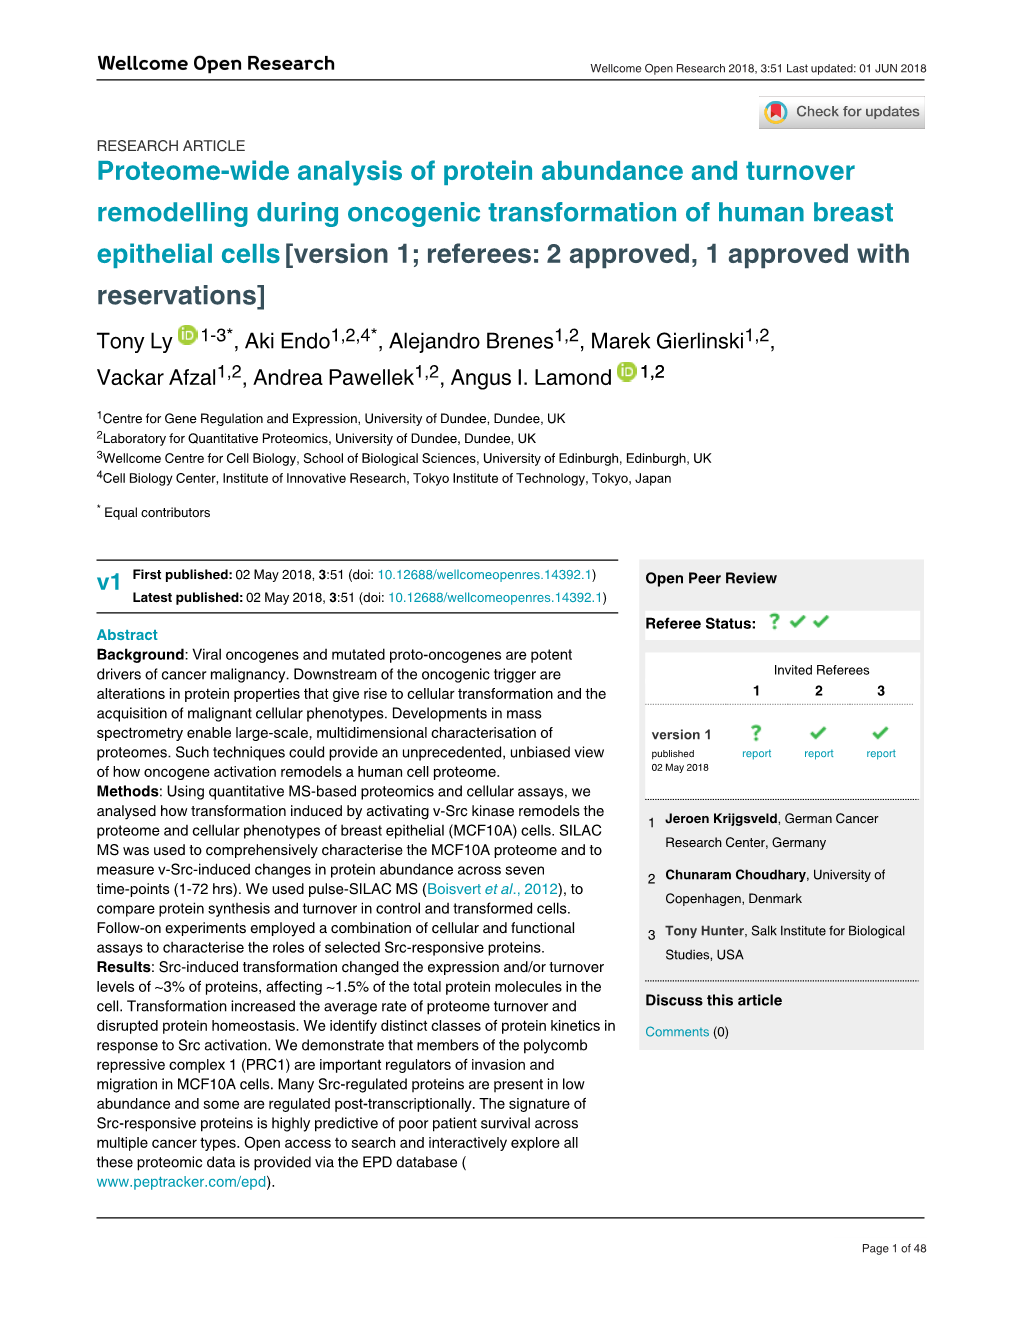 Proteome-Wide Analysis of Protein Abundance and Turnover